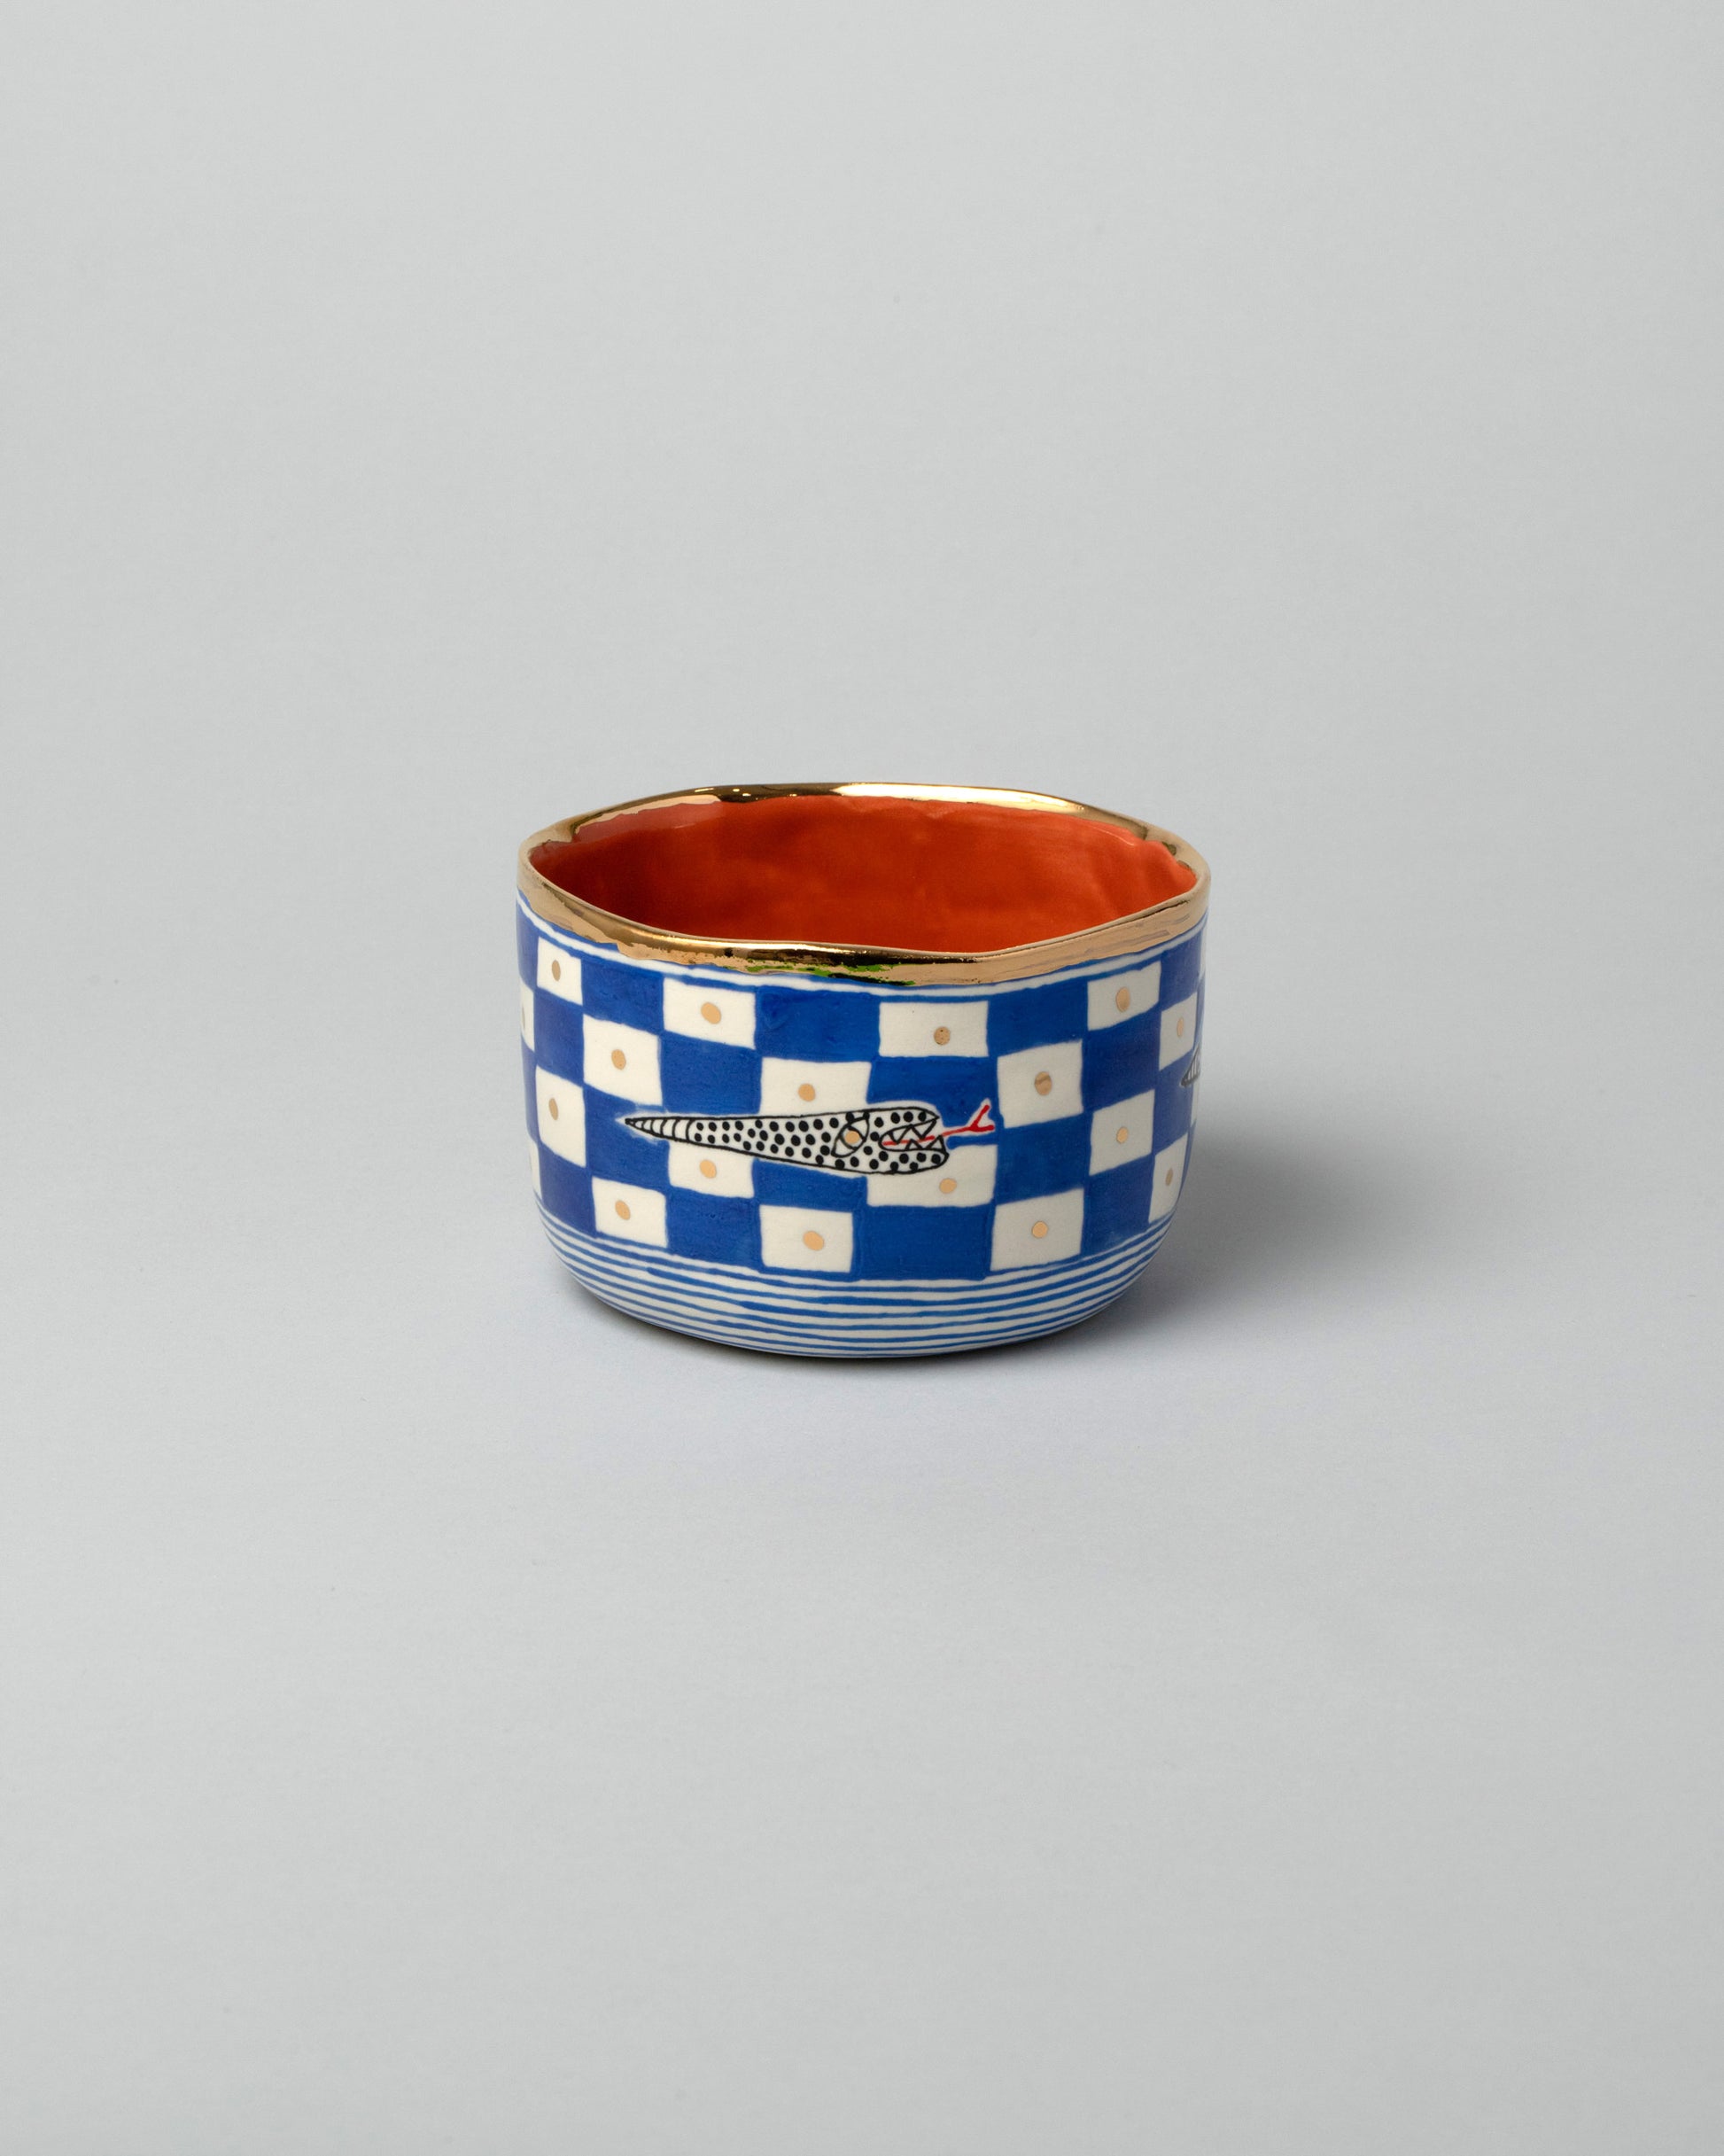 Suzanne Sullivan One Straight Sided Bowl on light color background.